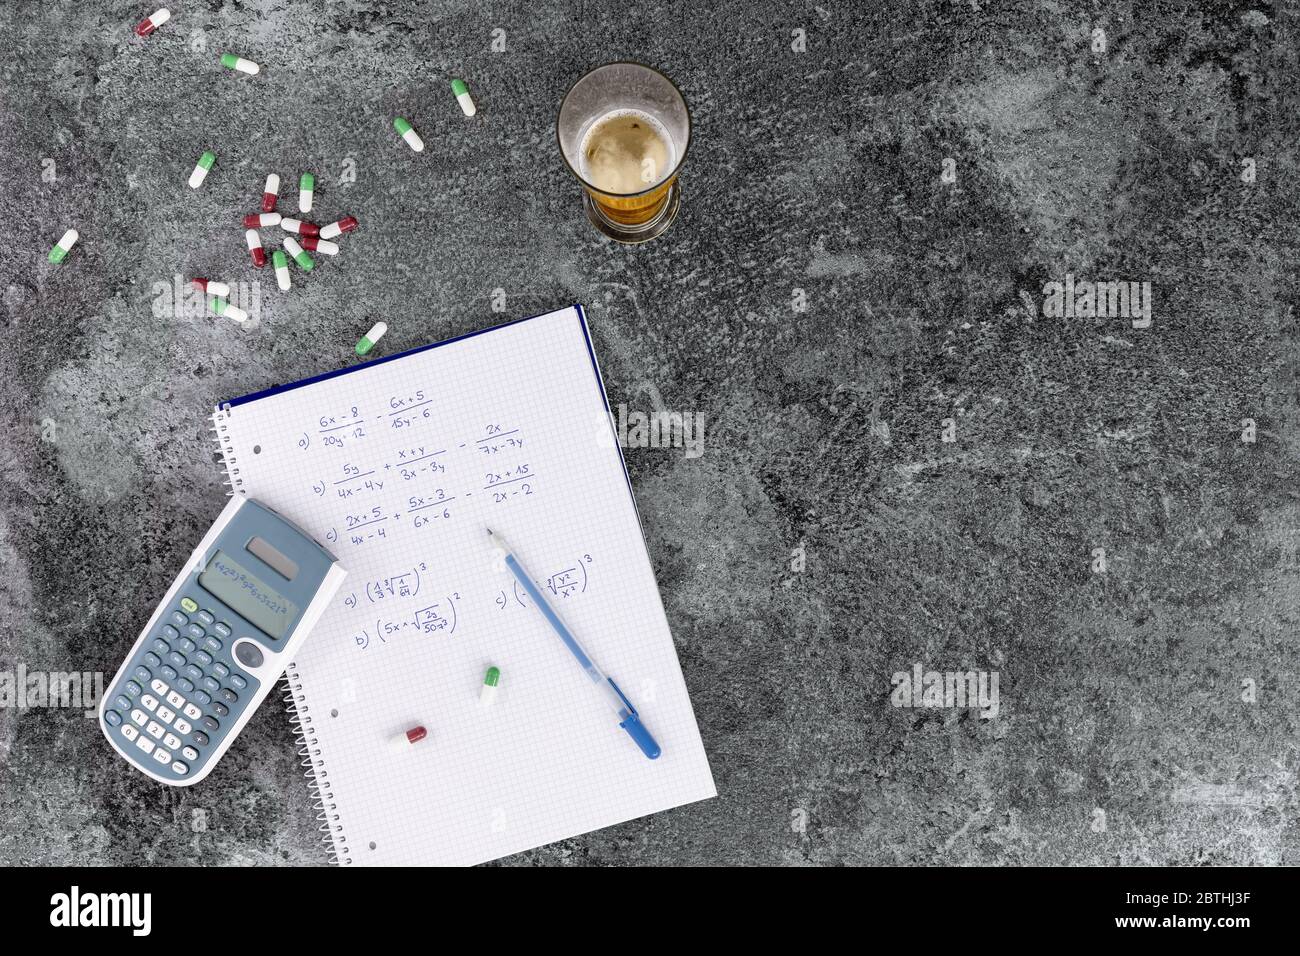 the excessive consumption of alcohol, drugs and medicines damages health and hinders learning, hand-written notes. calculator beer glass and pills on Stock Photo